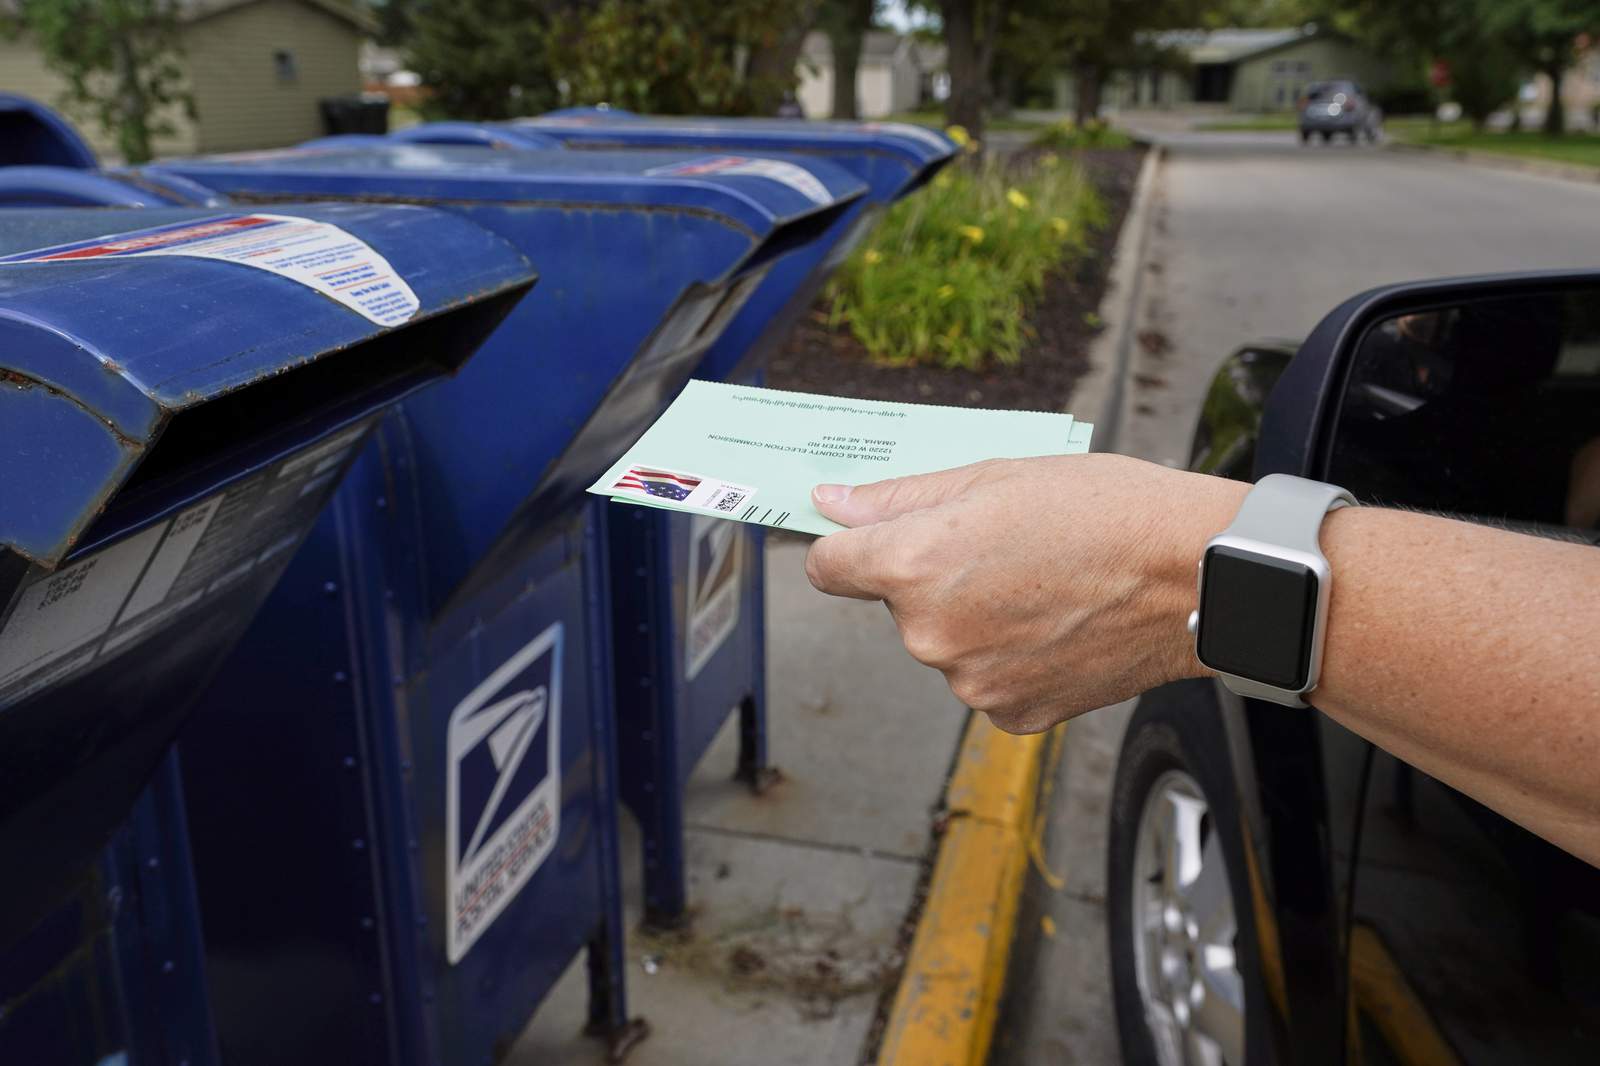 24 vote-by-mail drop-off locations will be available in Broward County ahead of Election Day